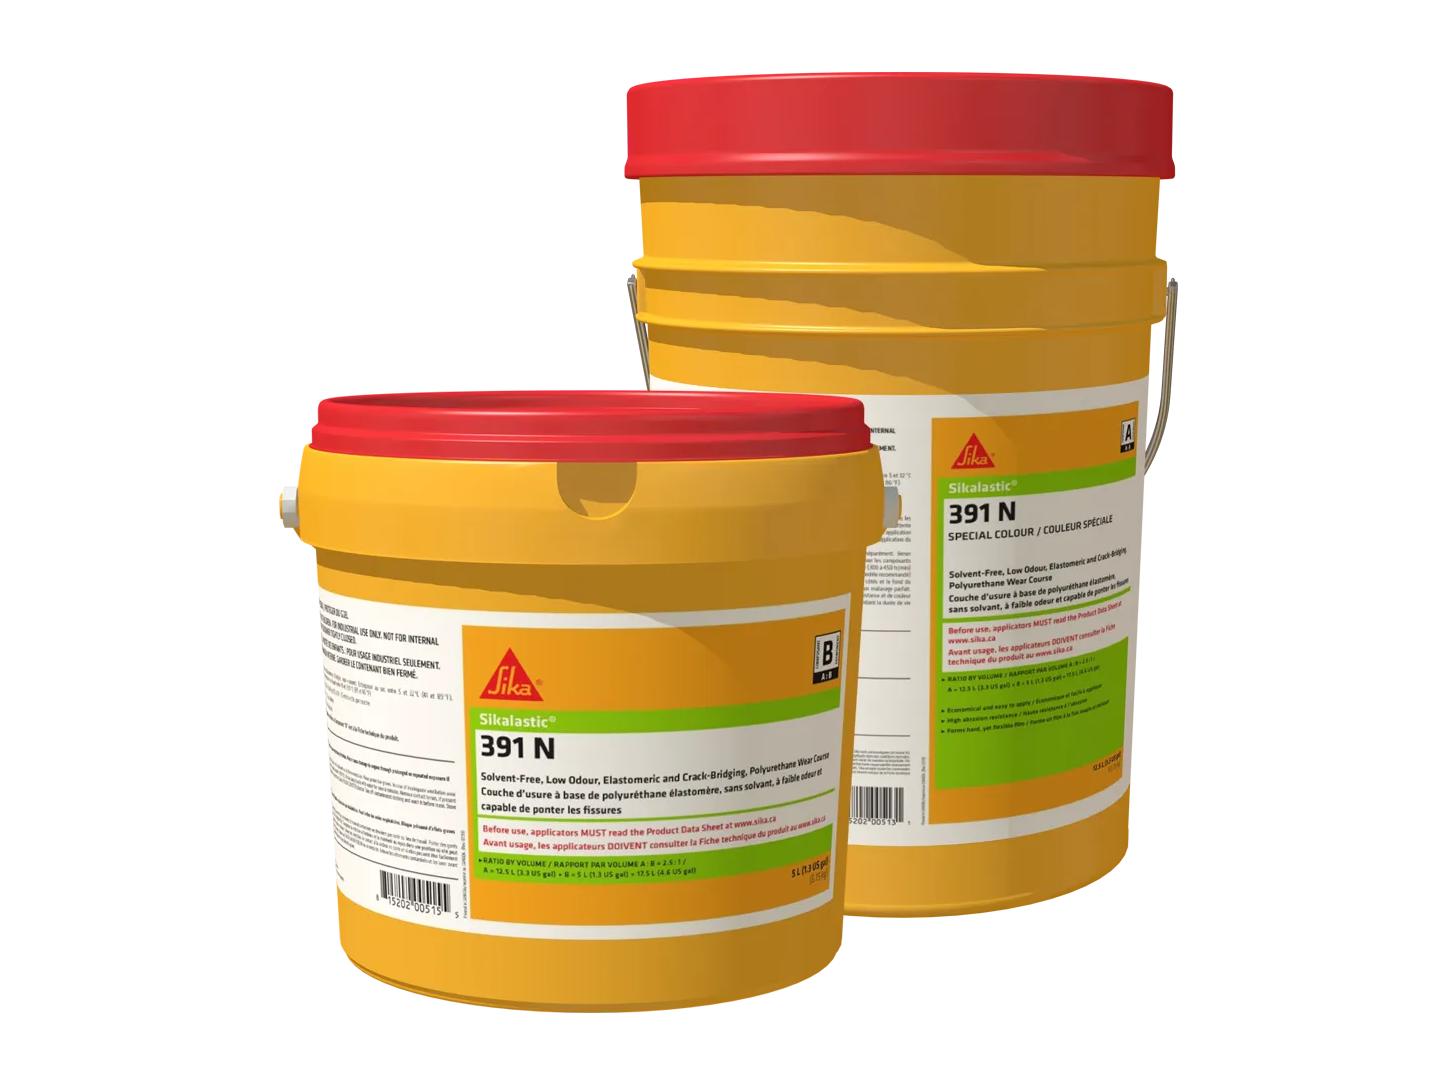 Sika (519902) product